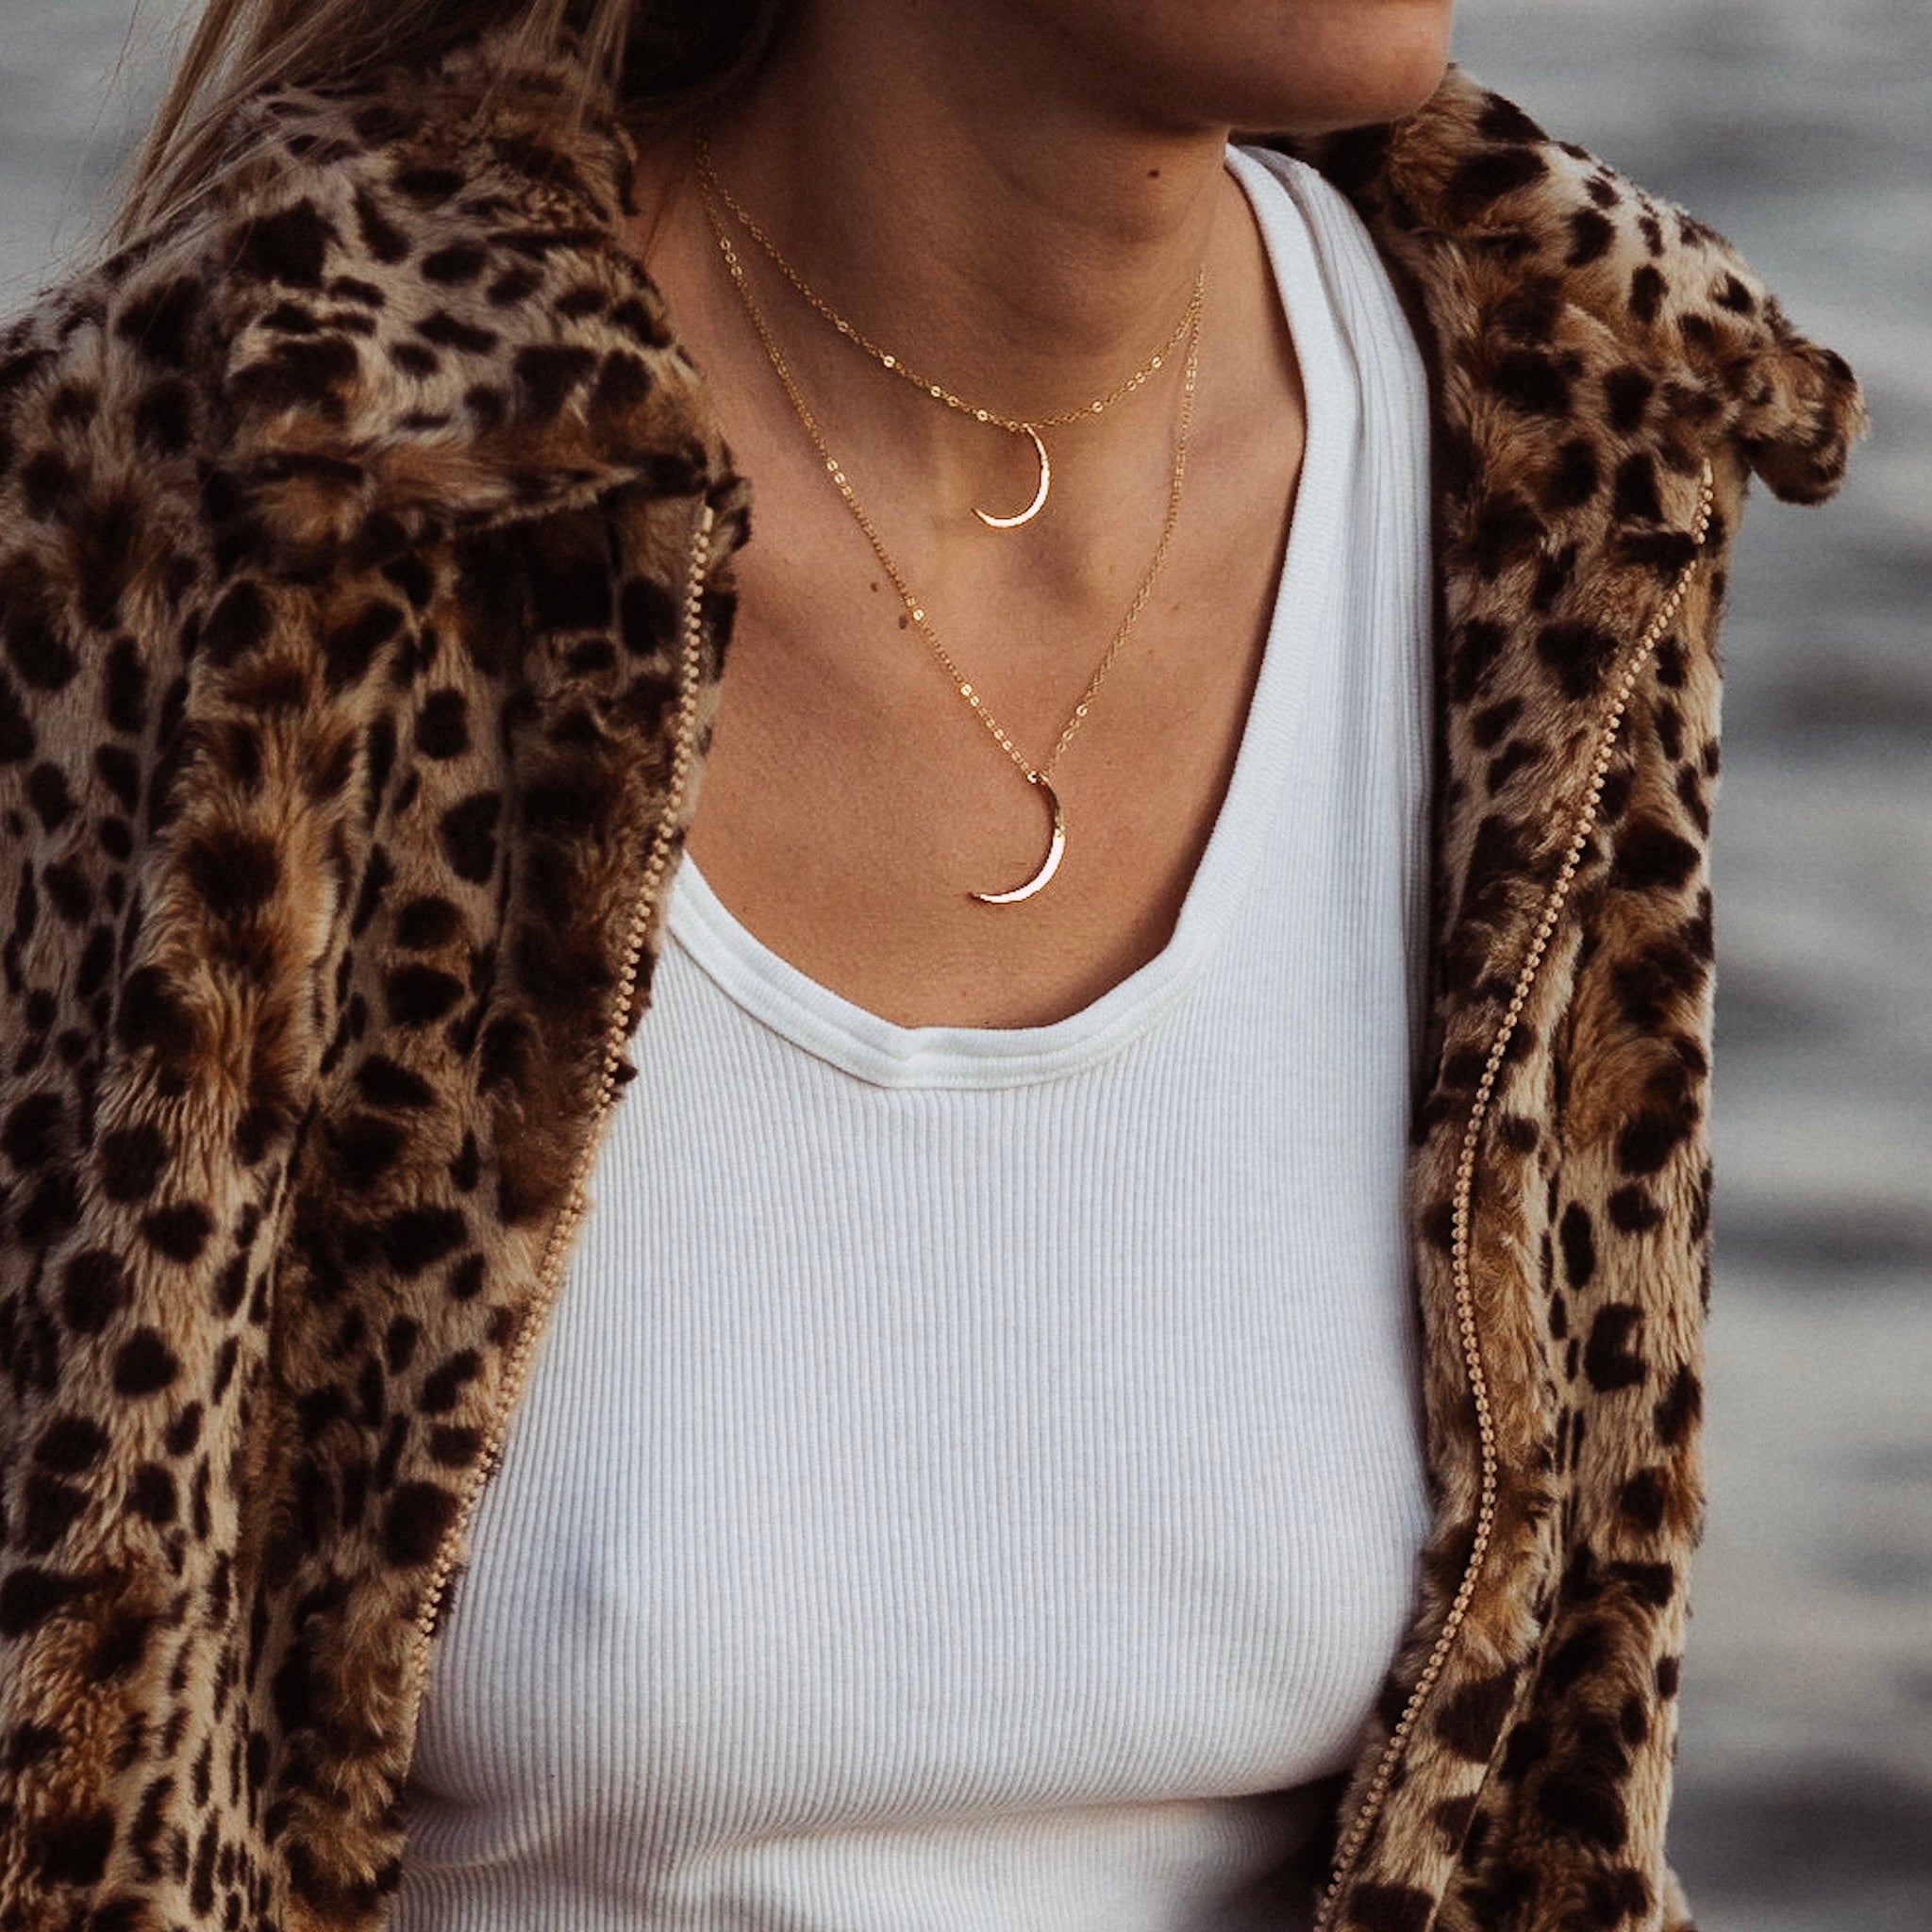 a close up of a woman wearing two gold crescent moon shaped pendant necklaces on gold chains and a white tank top with a leopard print jacket